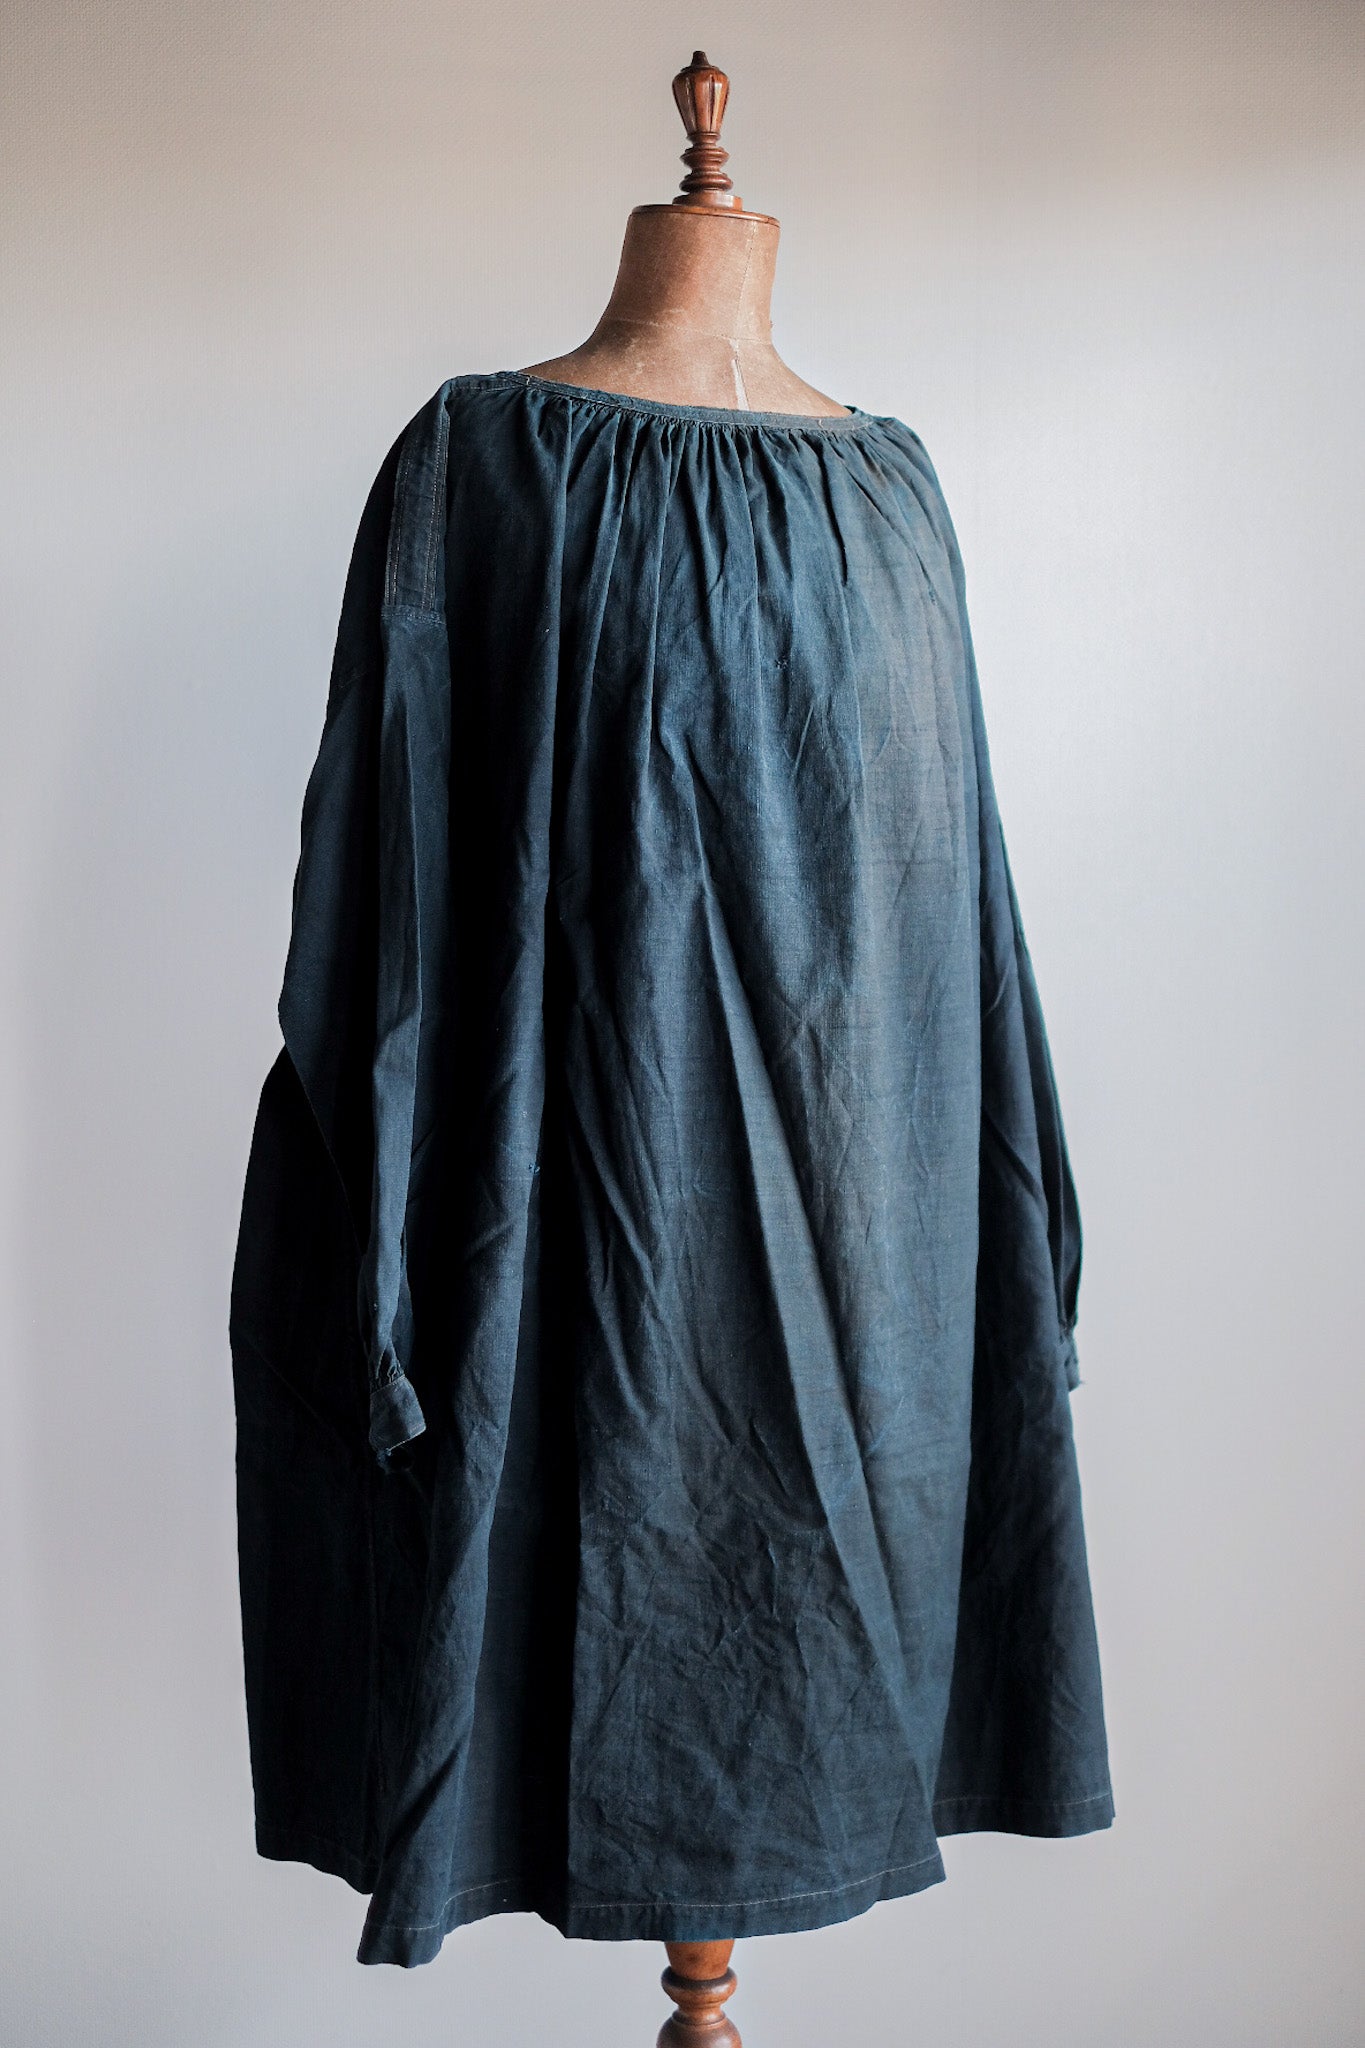 [Early 20th C] French Antique Indigo Linen Smock "Biaude"